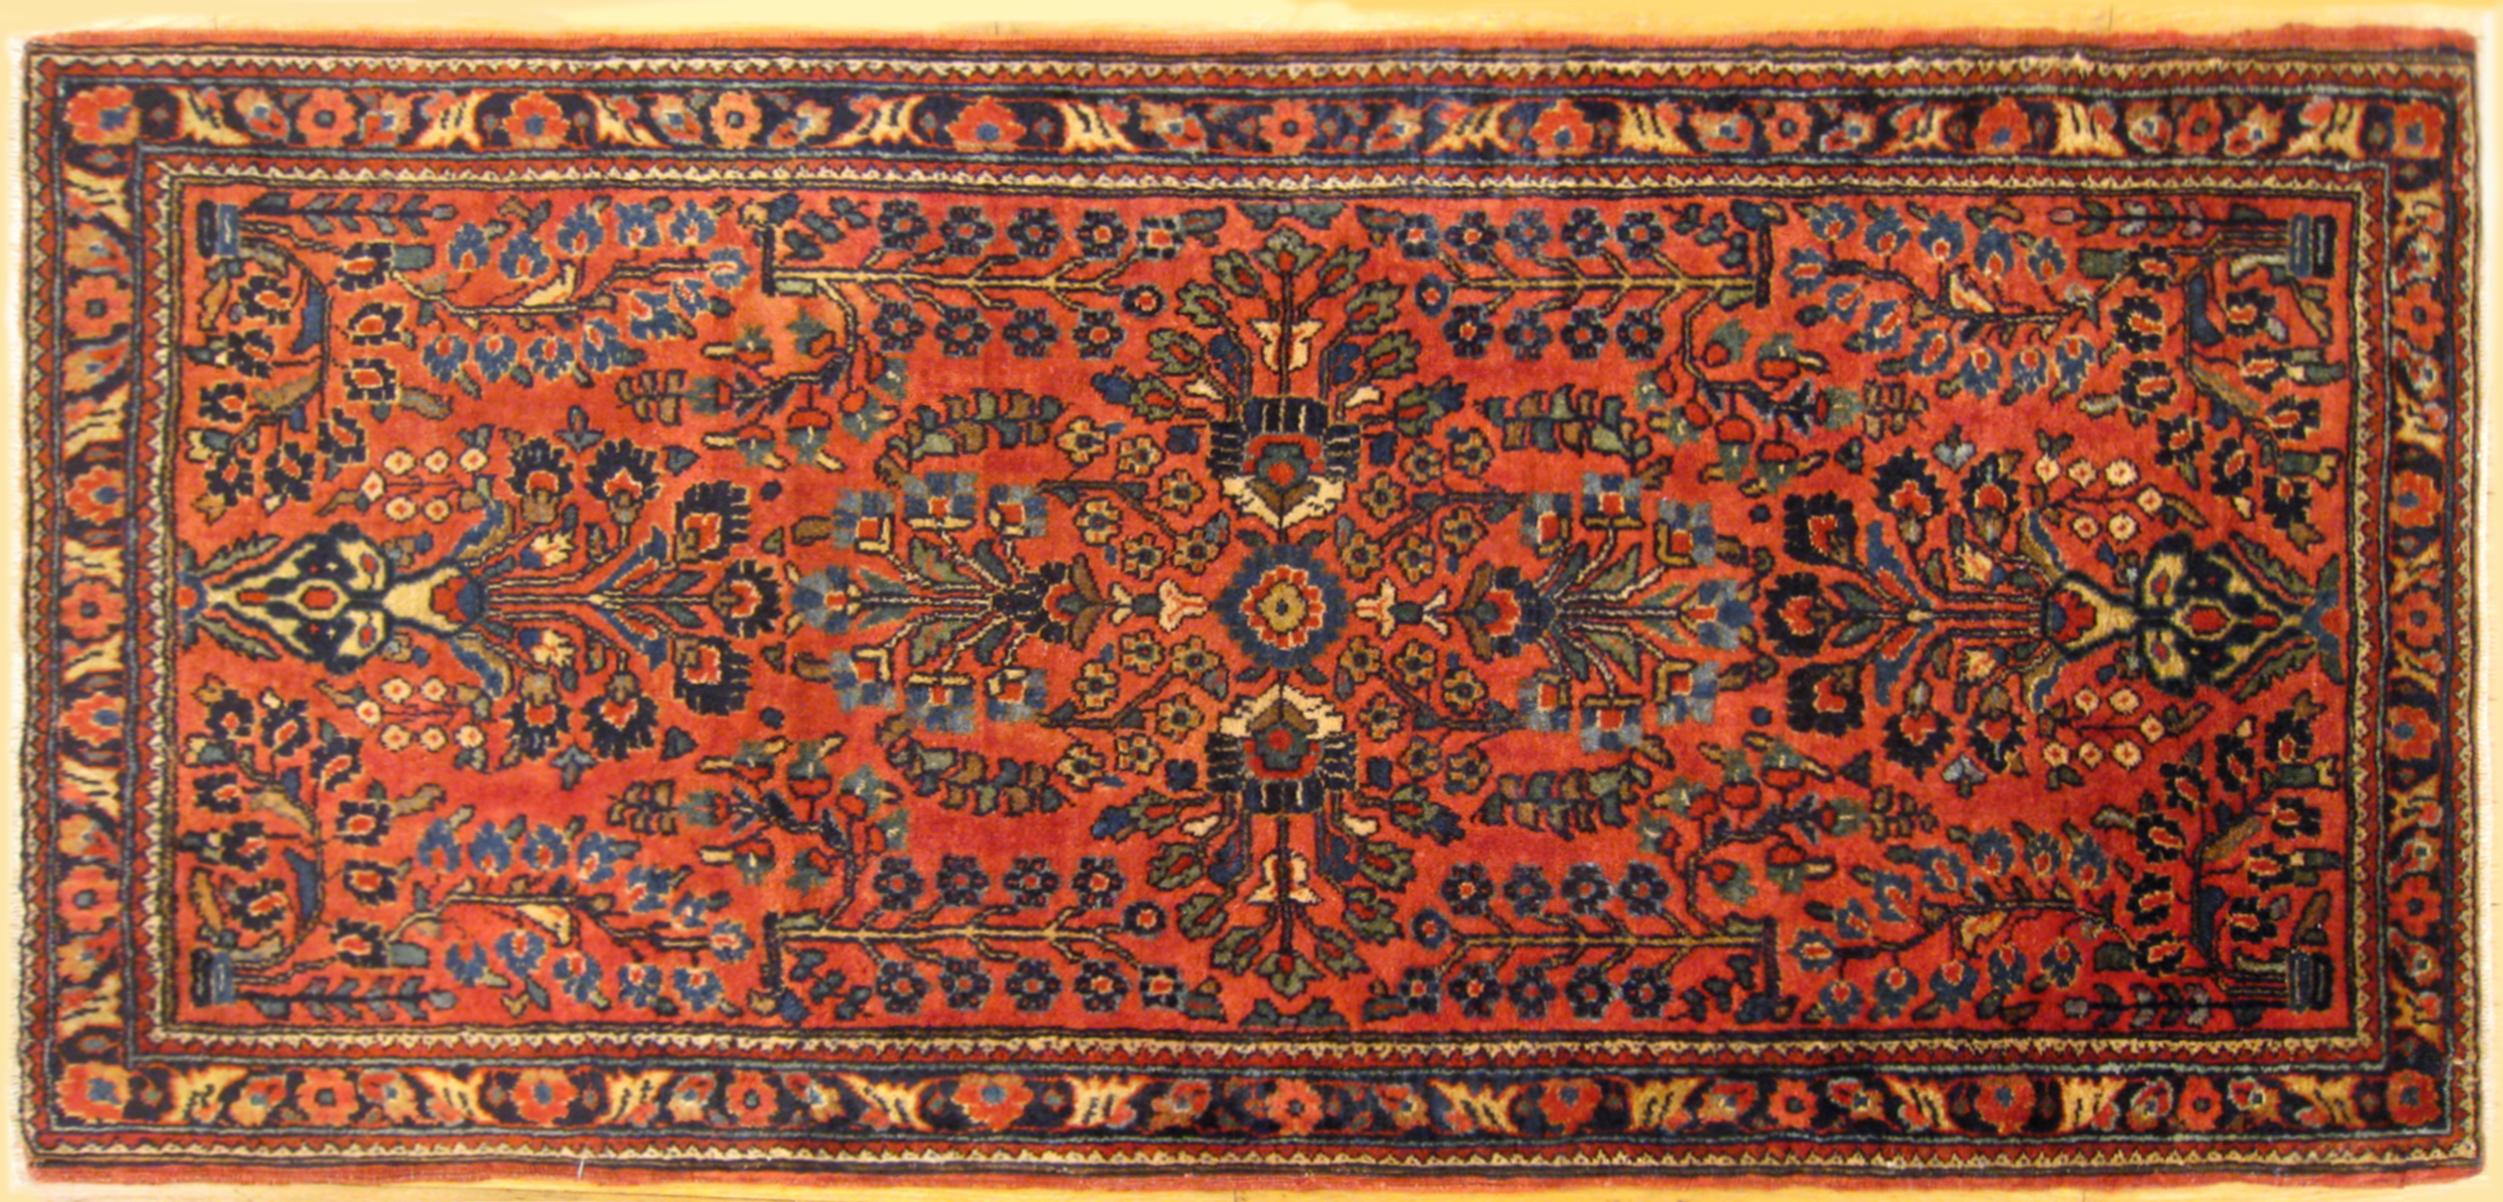 Antique Persian Sarouk Oriental Rug with Floral Design, circa 1920 in Small Size

An antique Persian Sarouk oriental rug, size 4'0